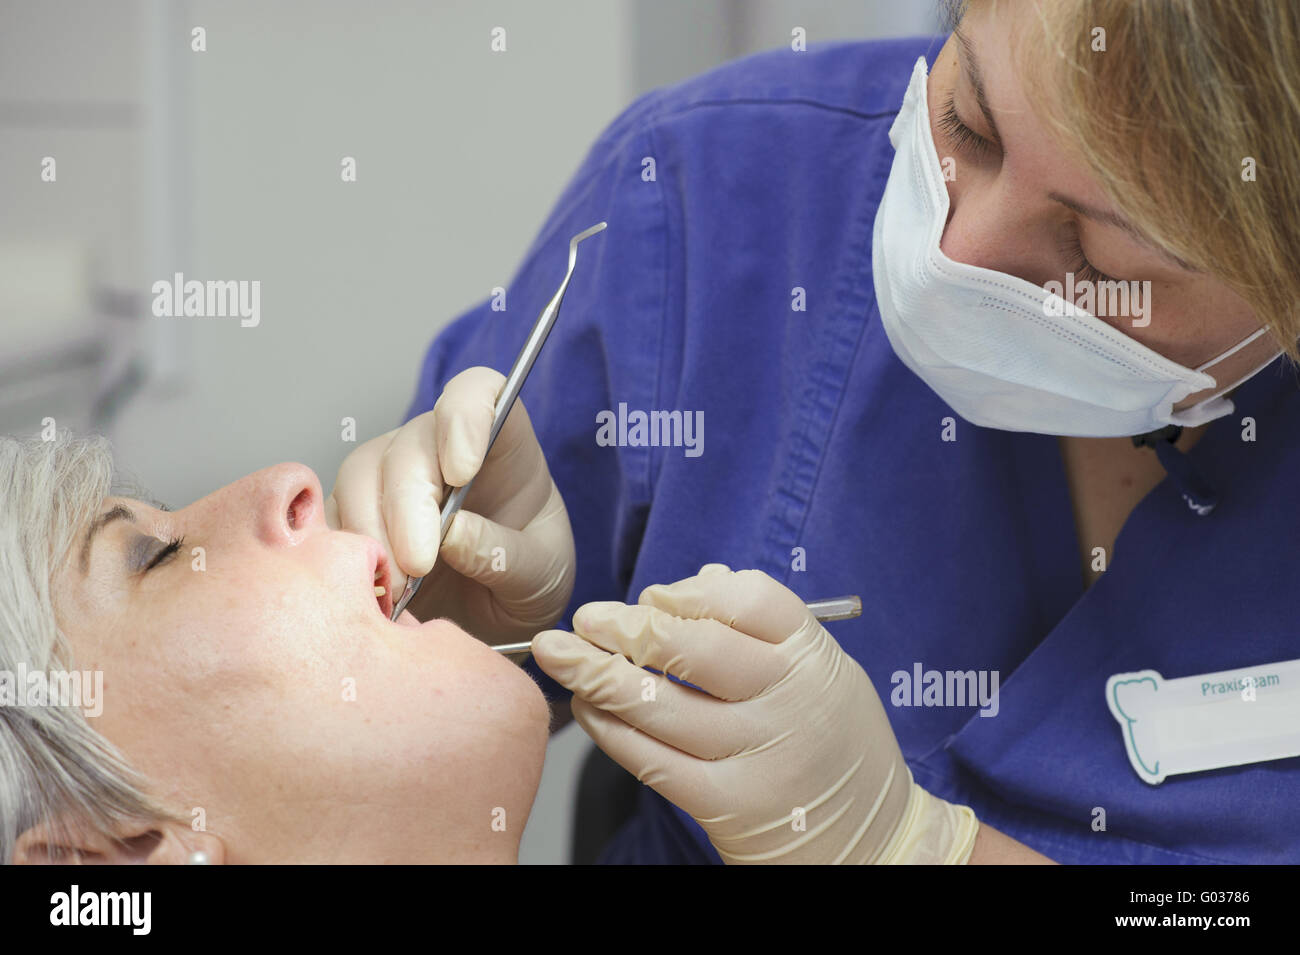 Dental assistant in dental treatment for a patient Stock Photo